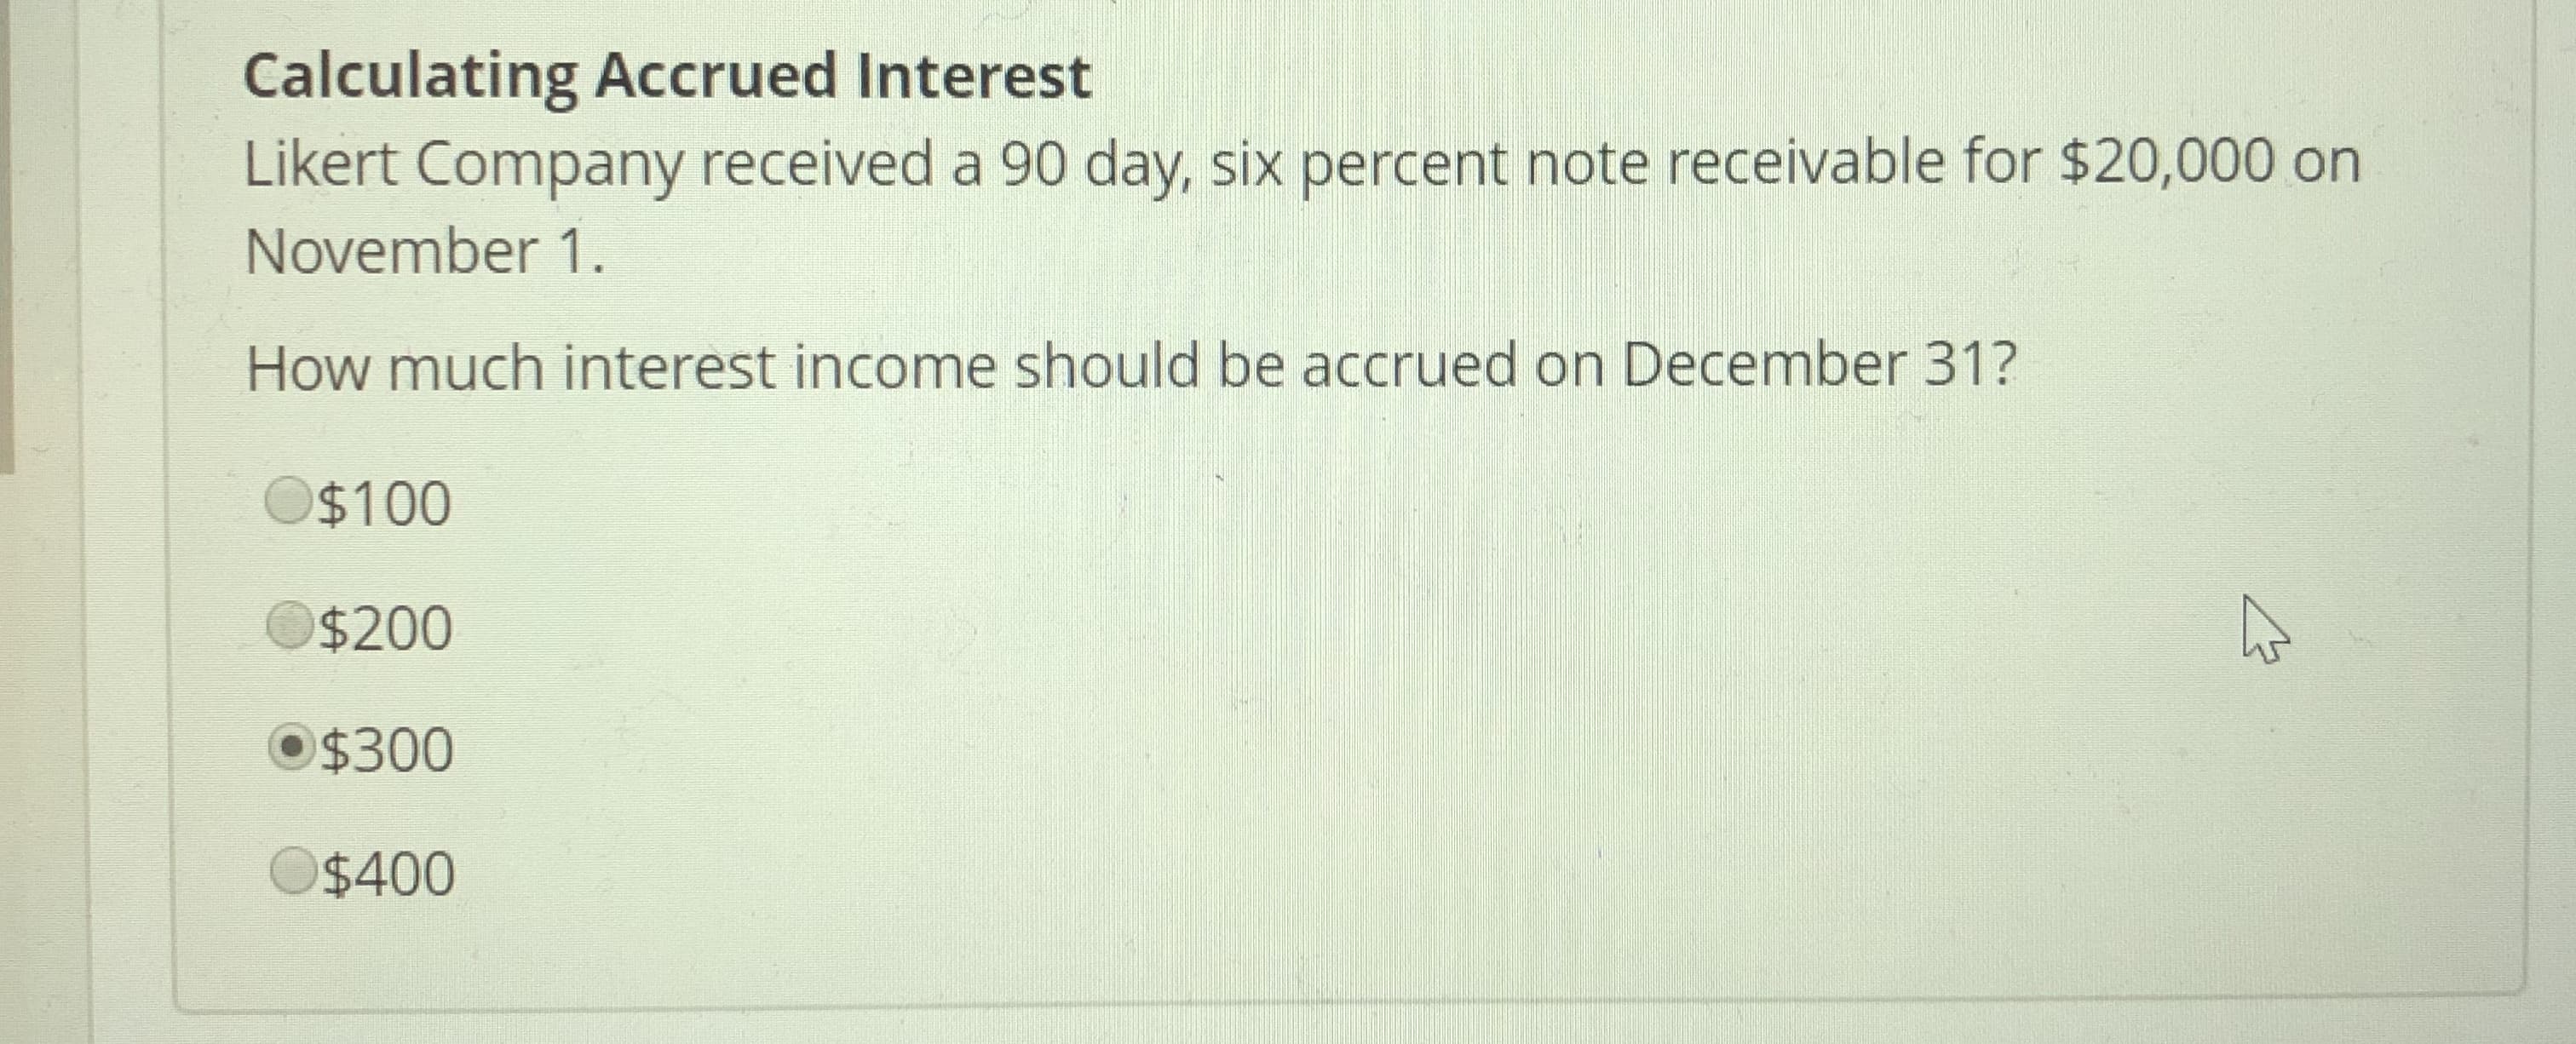 Calculating Accrued Interest
Likert Company received a 90 day, six percent note receivable for $20,000 on
November 1.
How much interest income should be accrued on December 31?
O$100
O$200
$300
O$400
